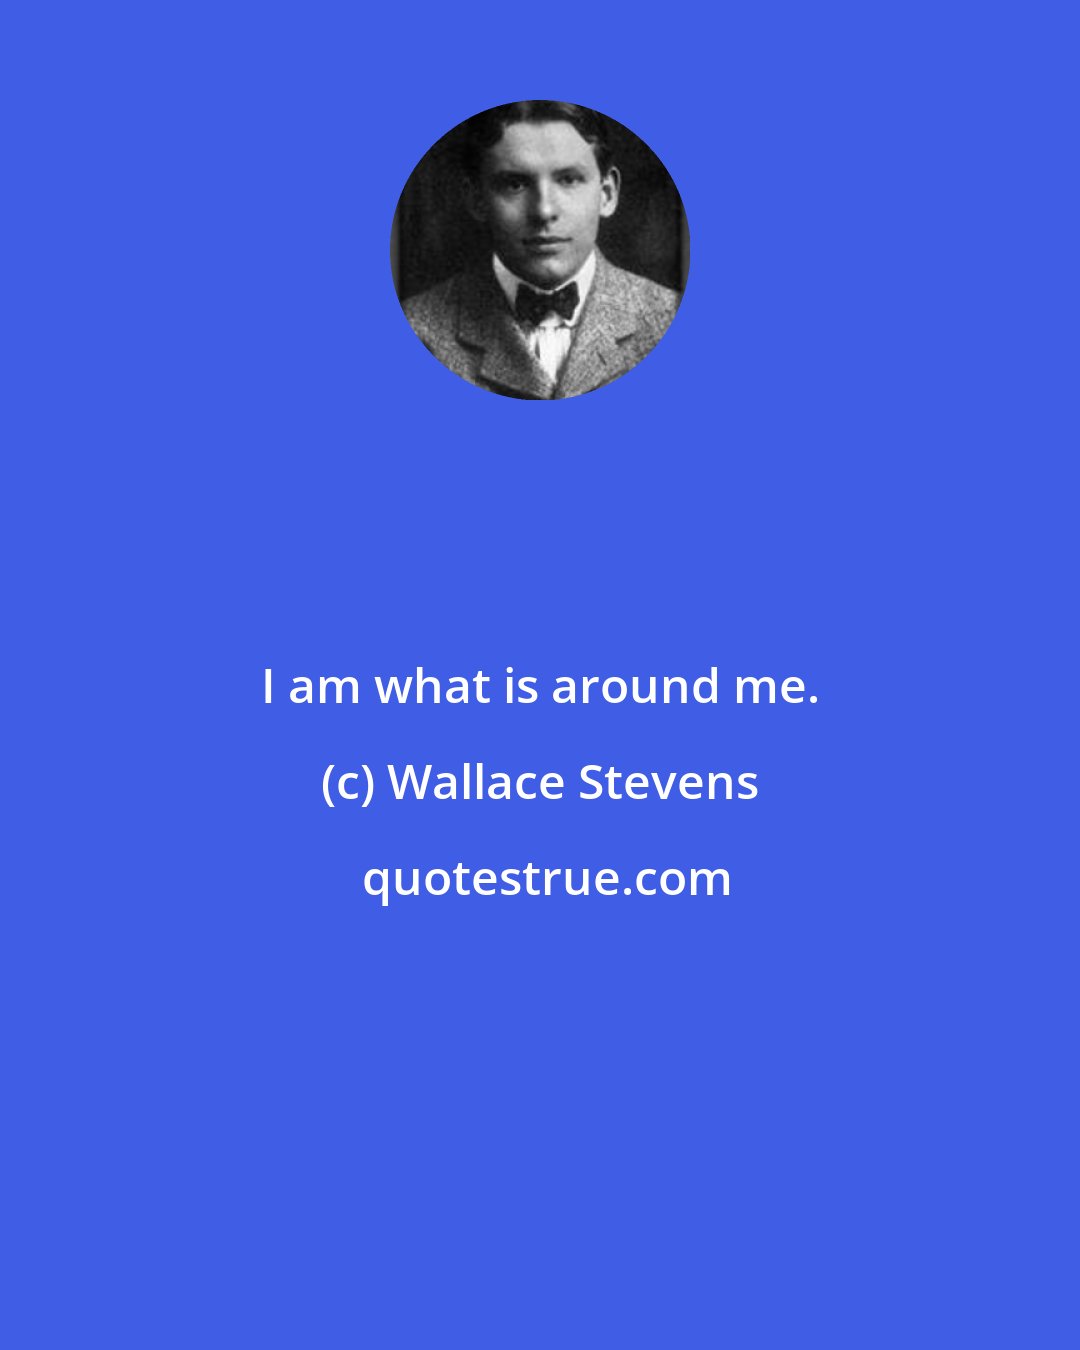 Wallace Stevens: I am what is around me.